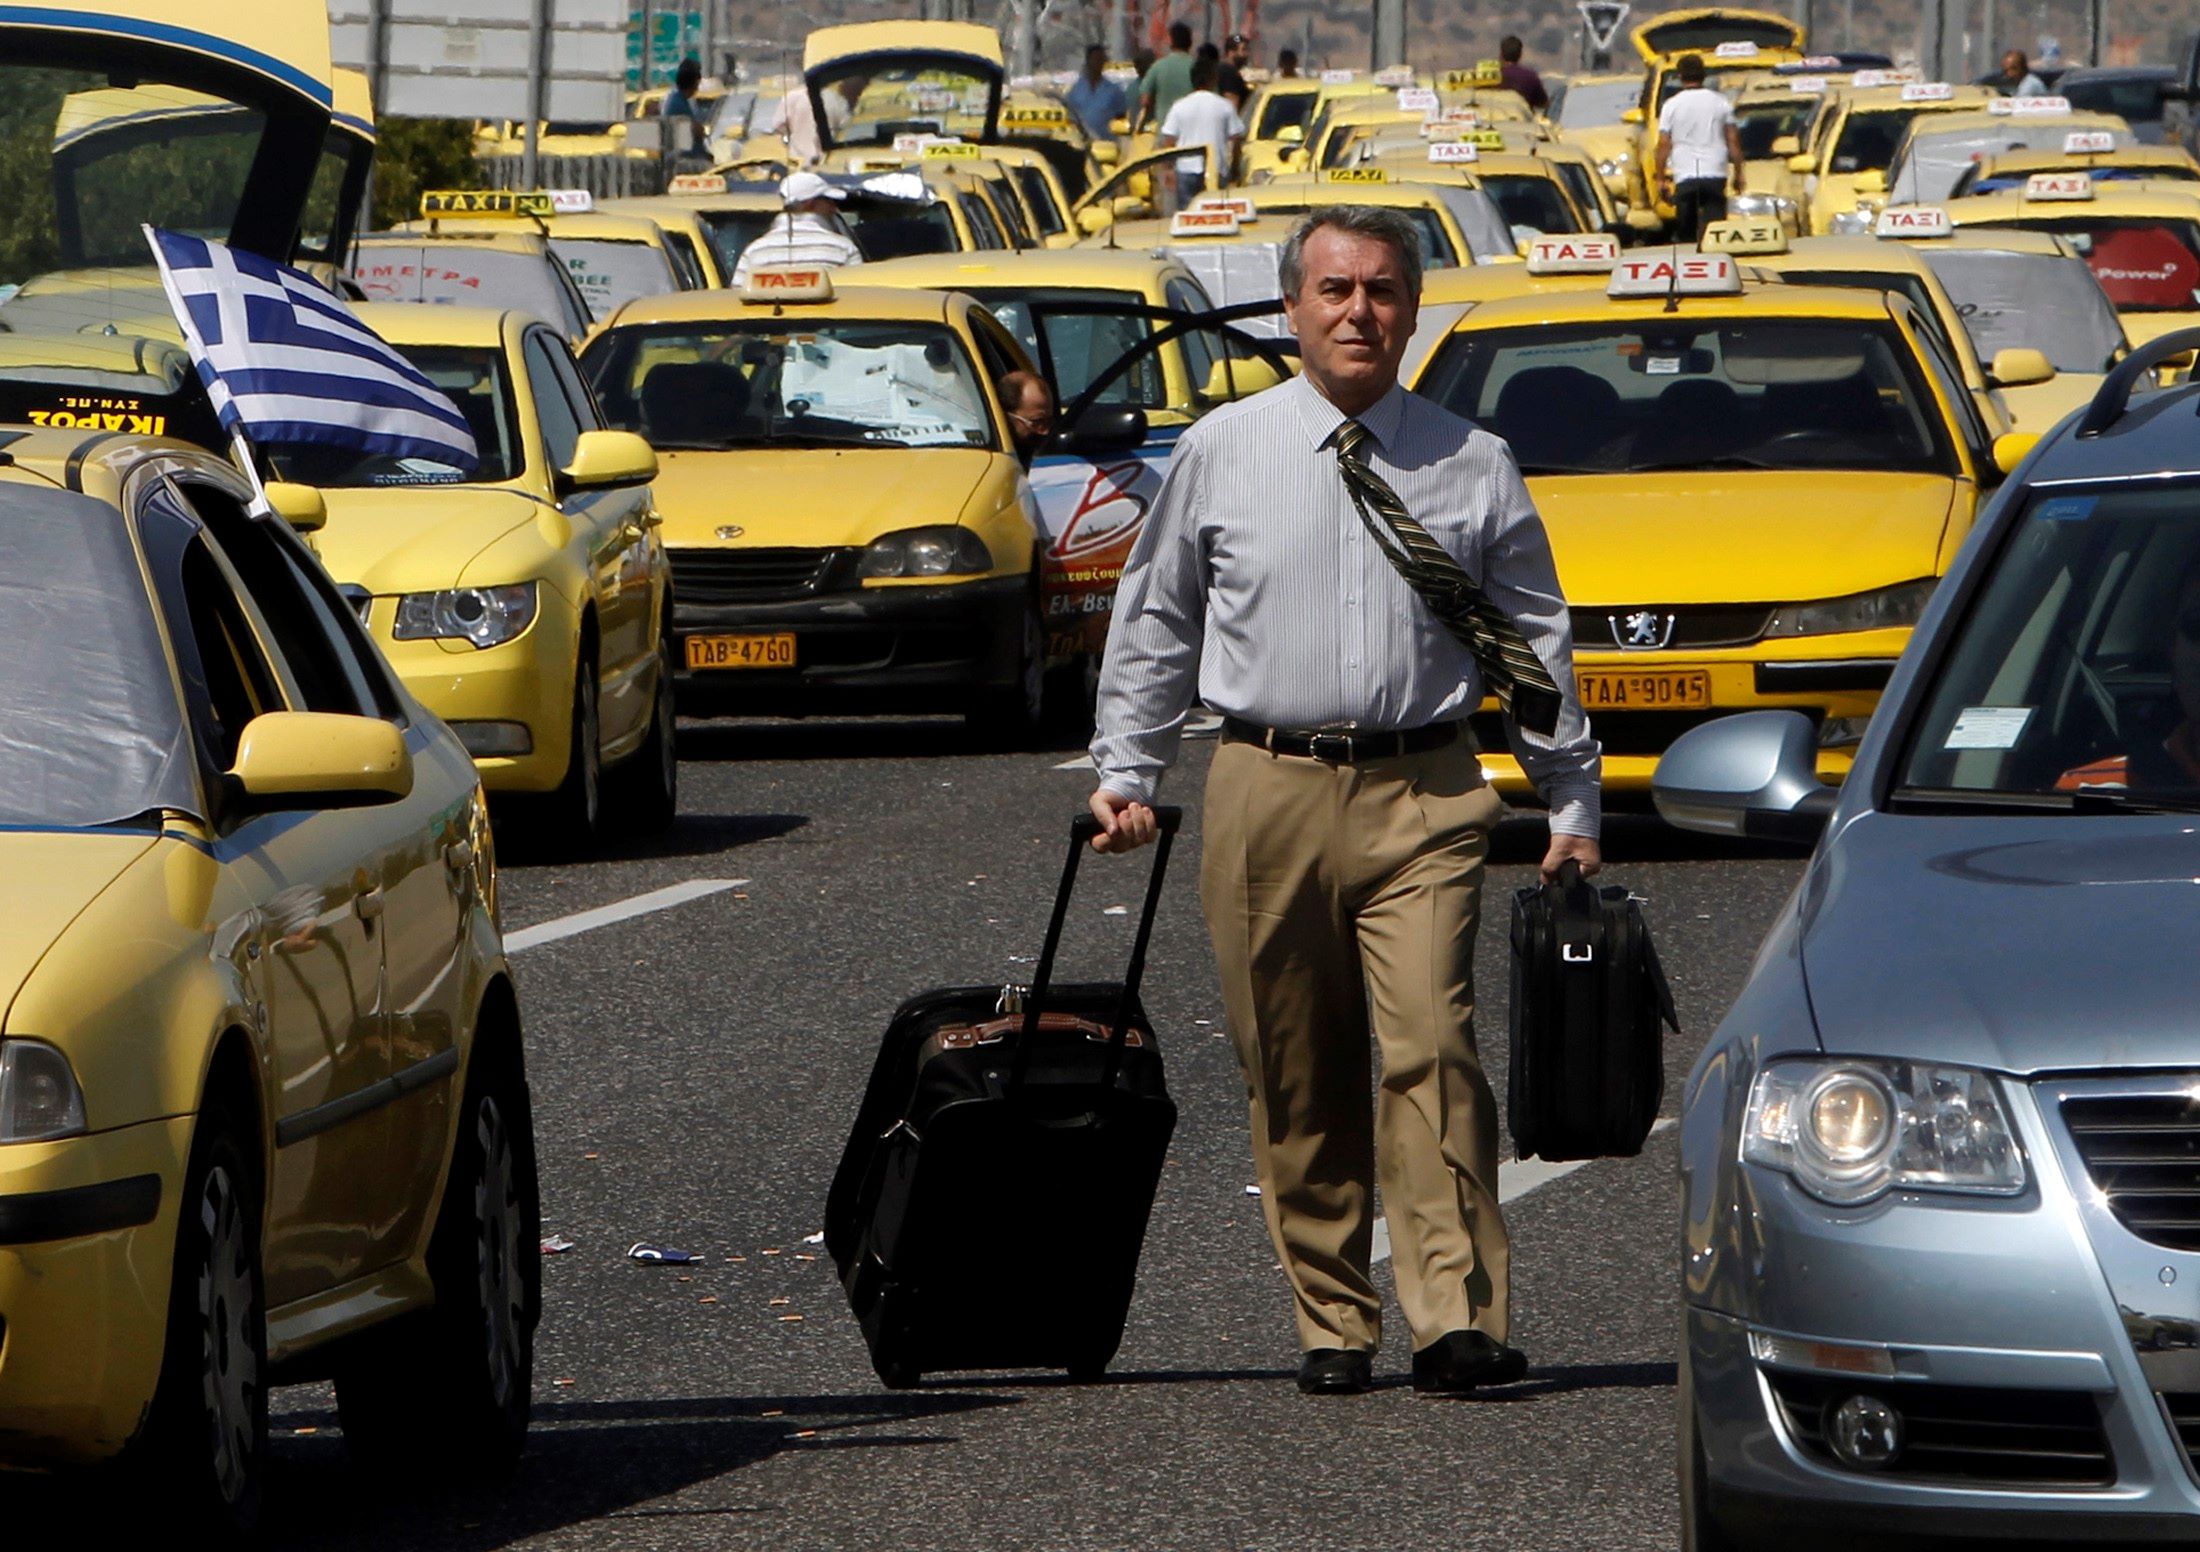 Taxi Strike and Protest in Athens on Proposed Tax Legislation